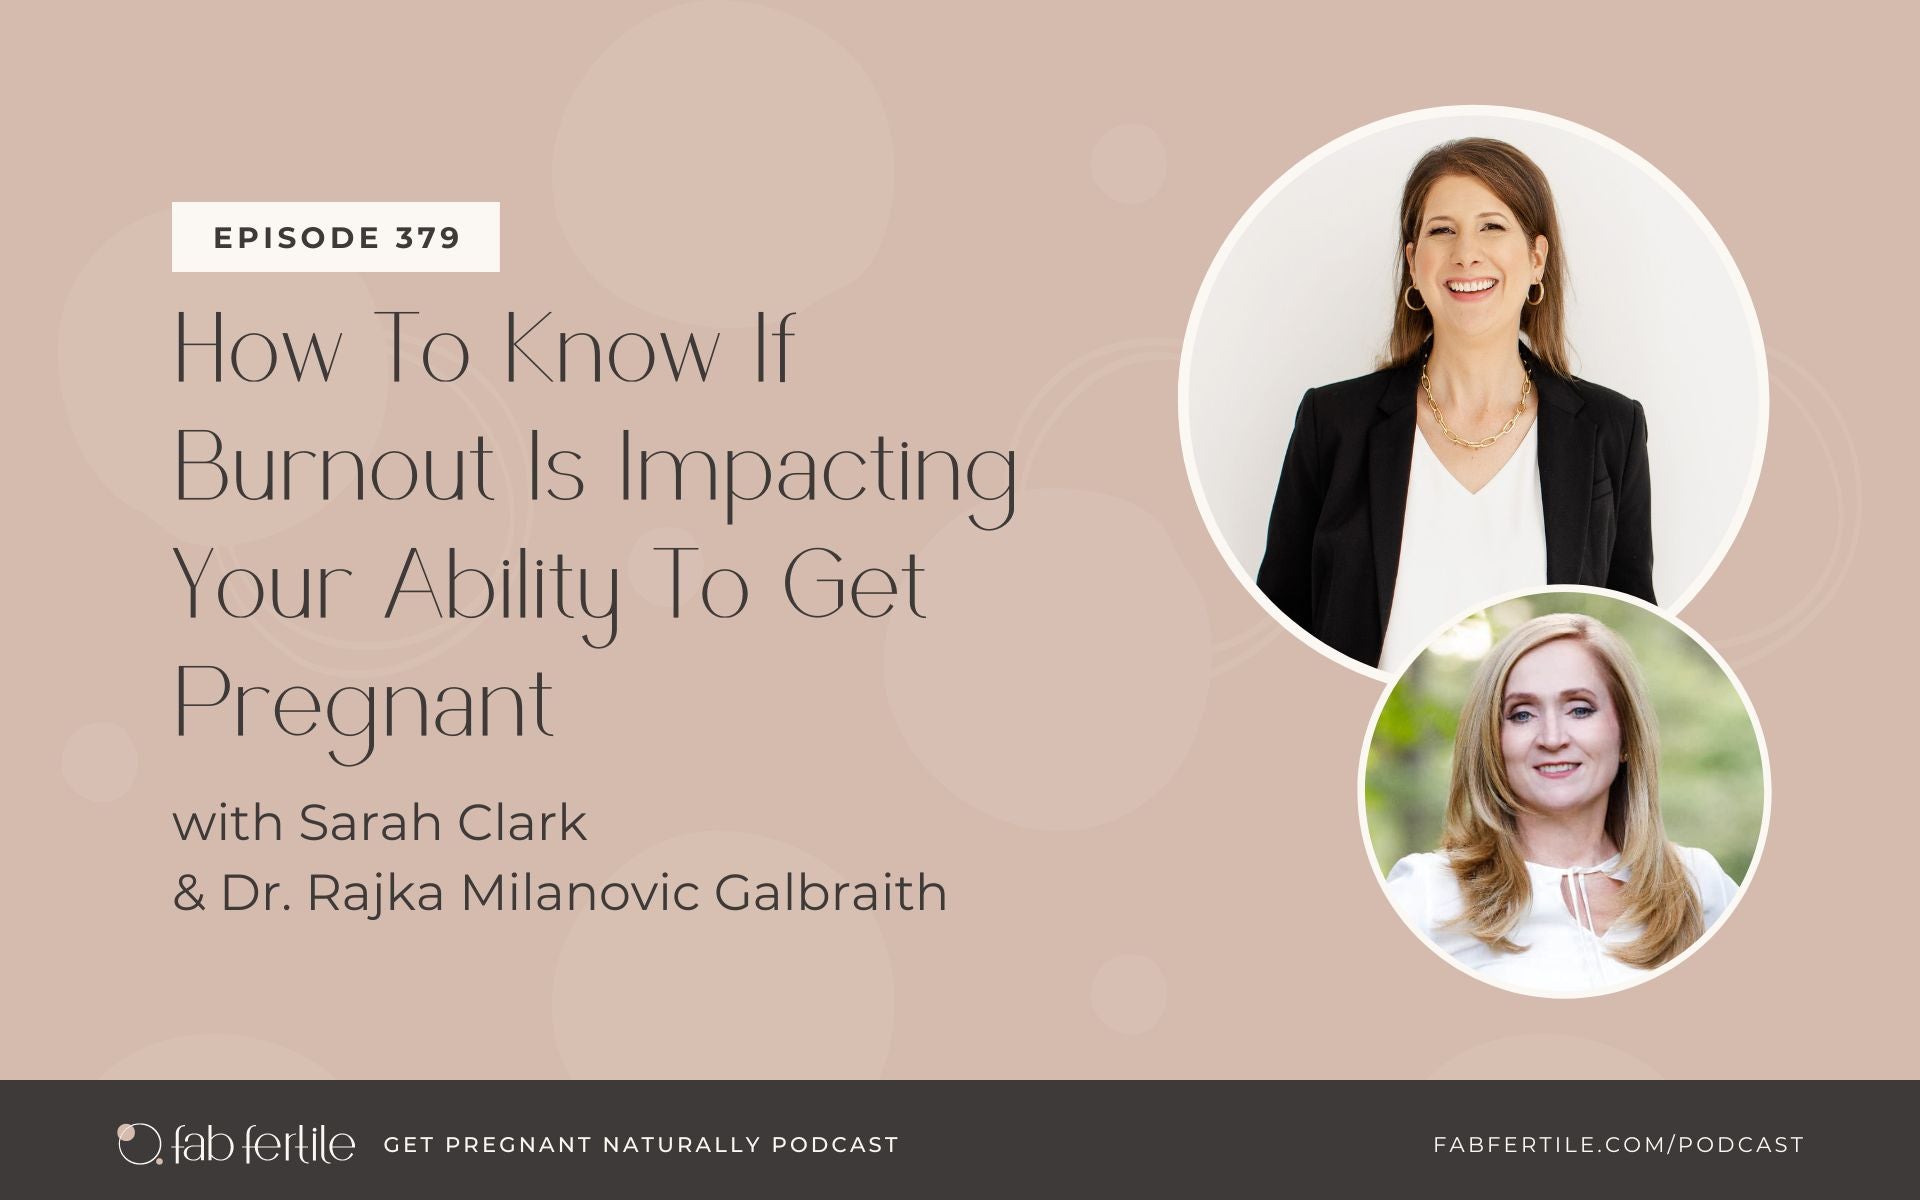 How To Know If Burnout Is Impacting Your Ability To Get Pregnant with Dr. Rajka Milanovic Galbraith